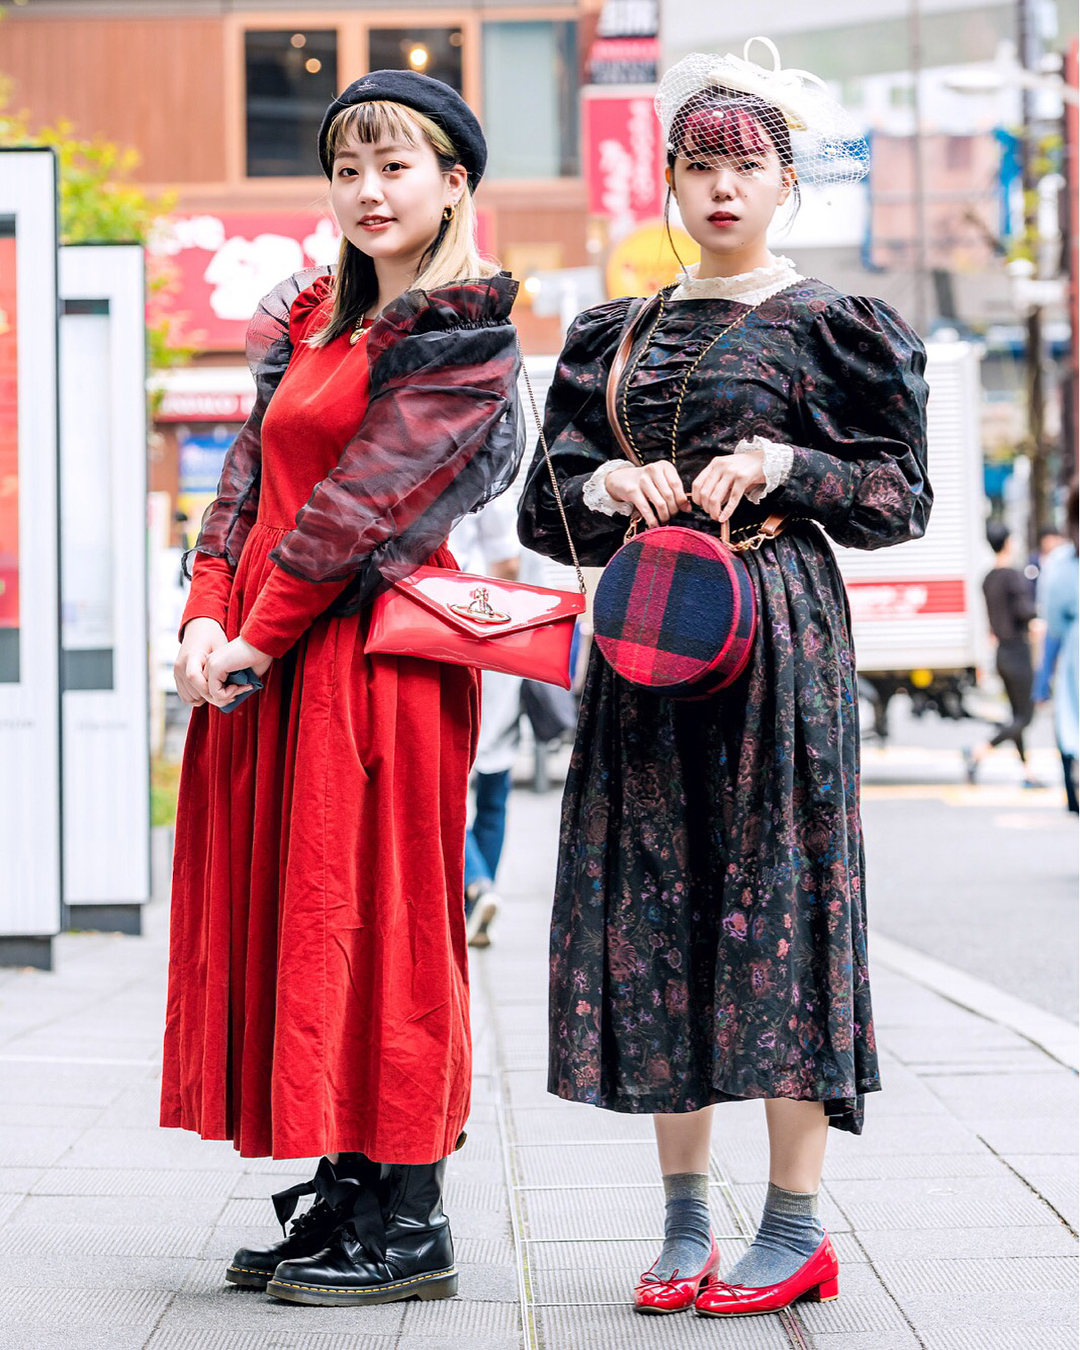 @Tokyo Fashion: Tokyo Fashion Week street style we've been shooting for ...